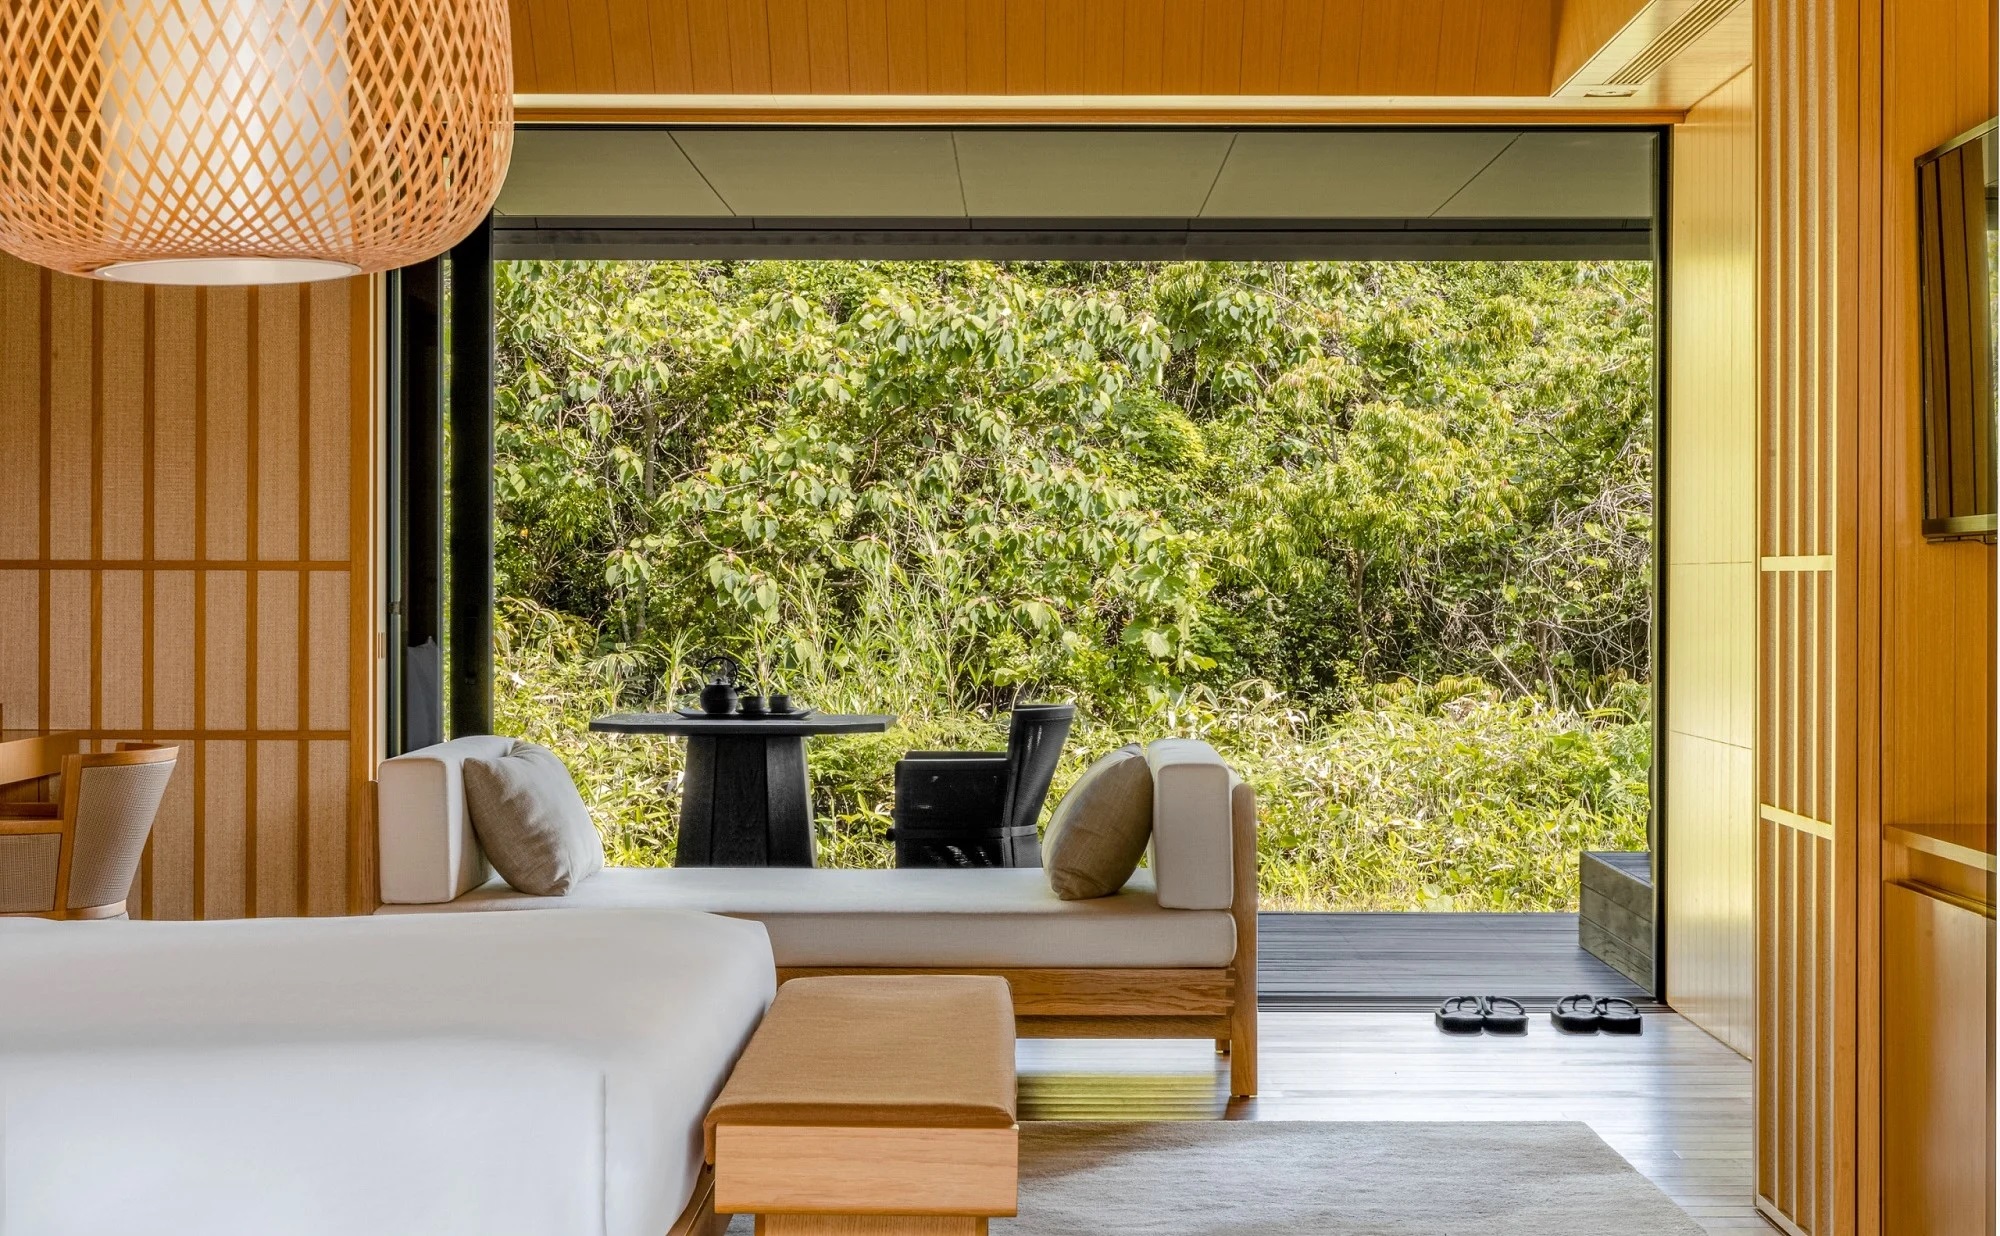 Amanemu in Ise-Shima National Park is a sanctuary of serenity